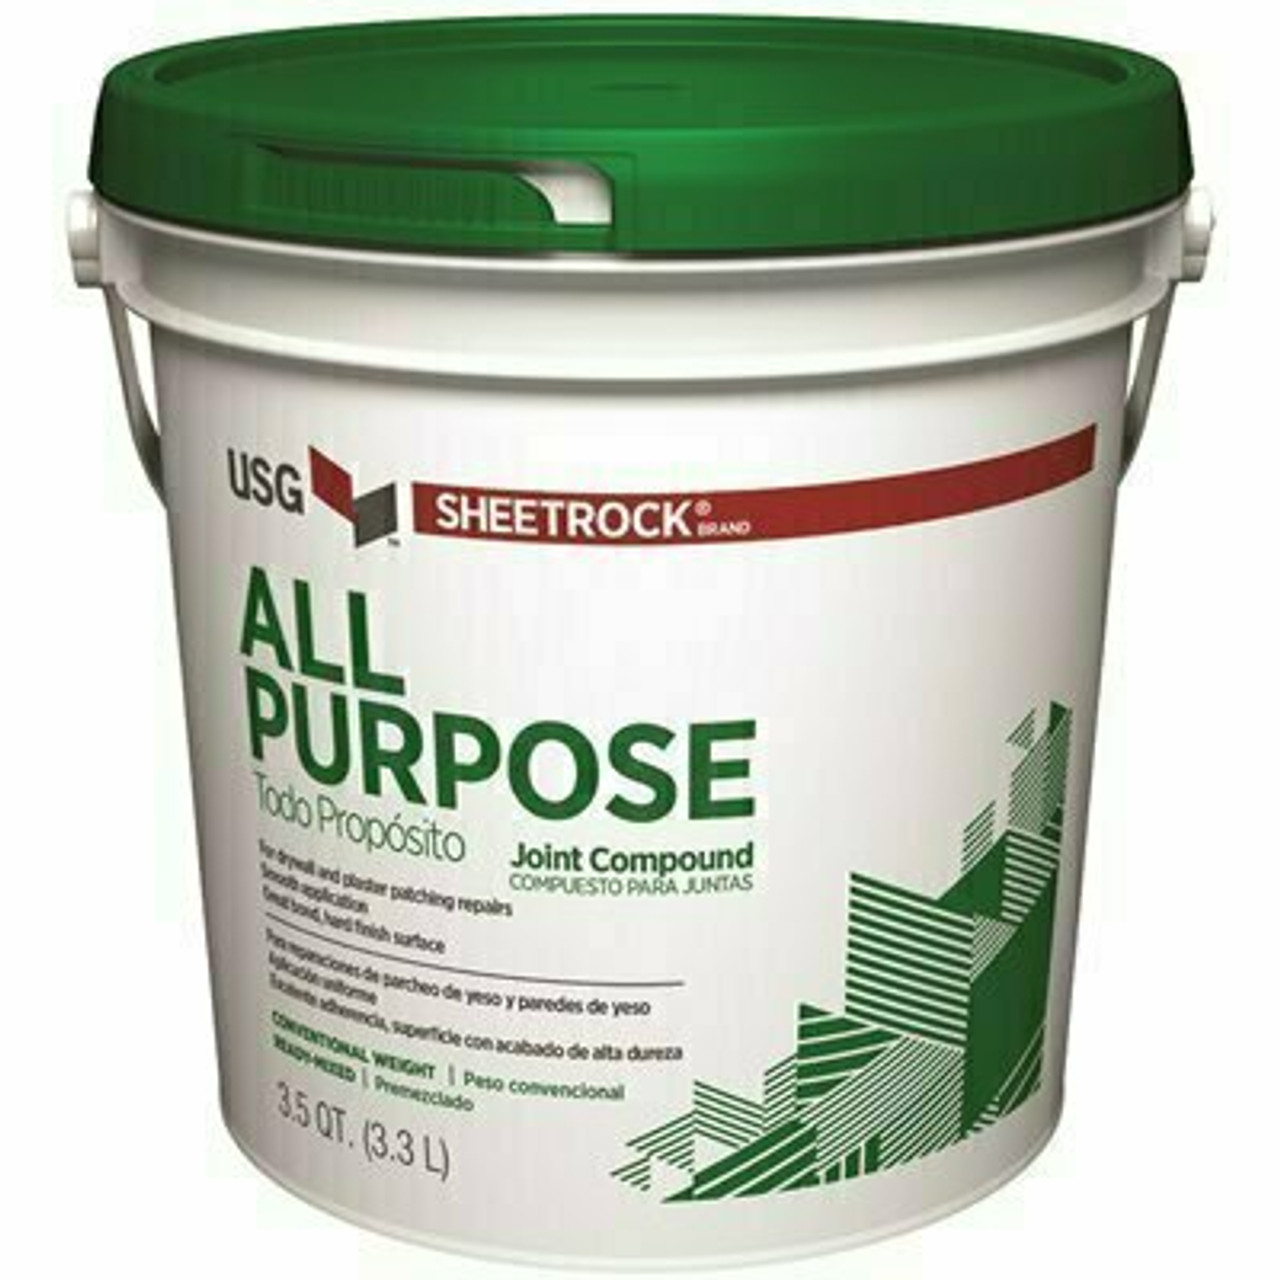 Usg Sheetrock Brand 3.5 Qt. All-Purpose Pre-Mixed Joint Compound